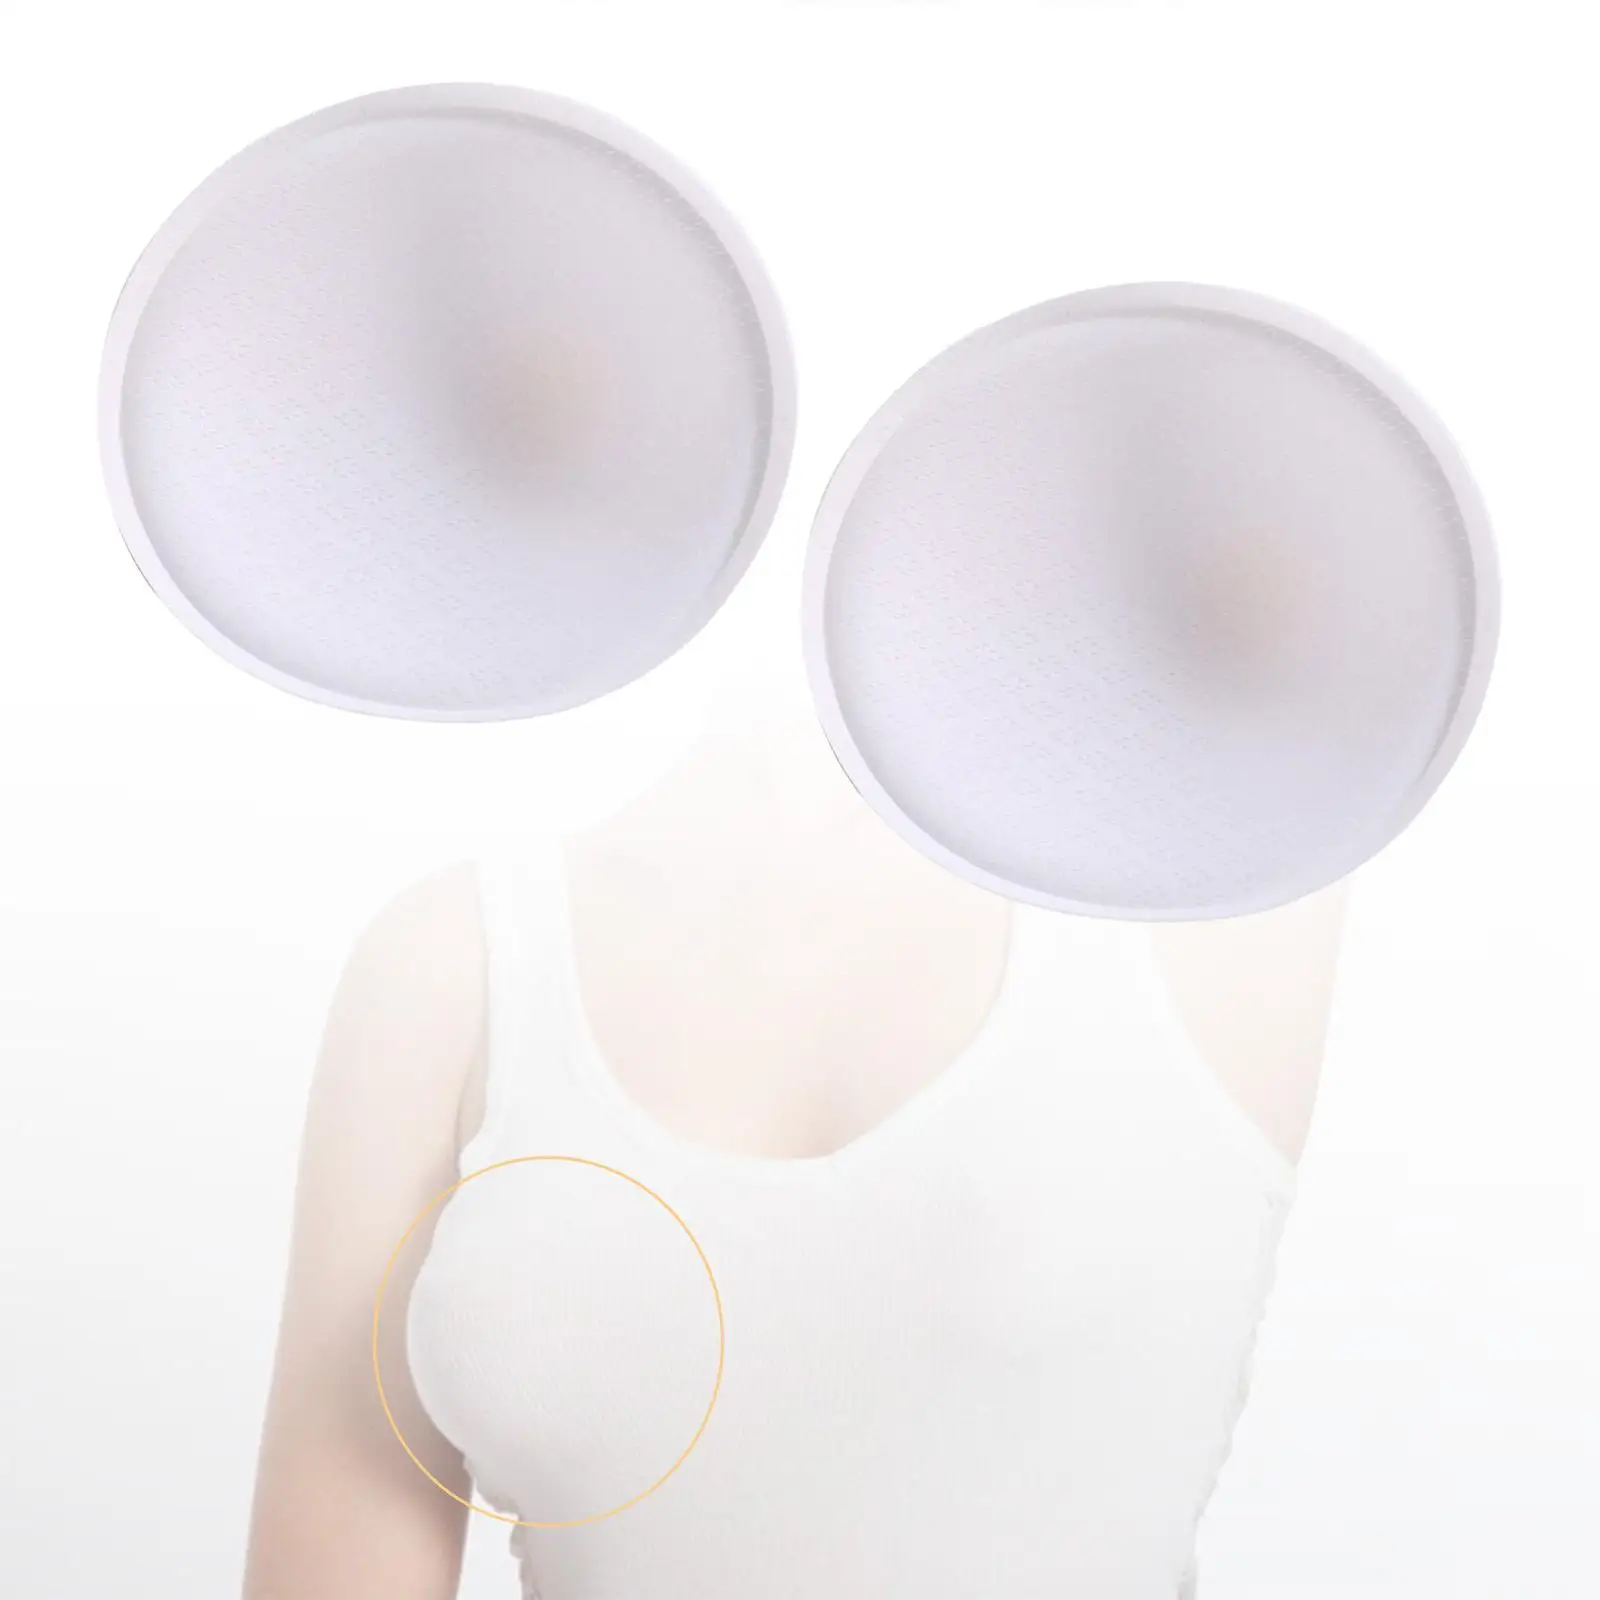 2 Pieces Women Bra Pads Inserts, Sports Bra Cups Inserts Washable Comfy Breathable Replacement Removable for Evening Gowns